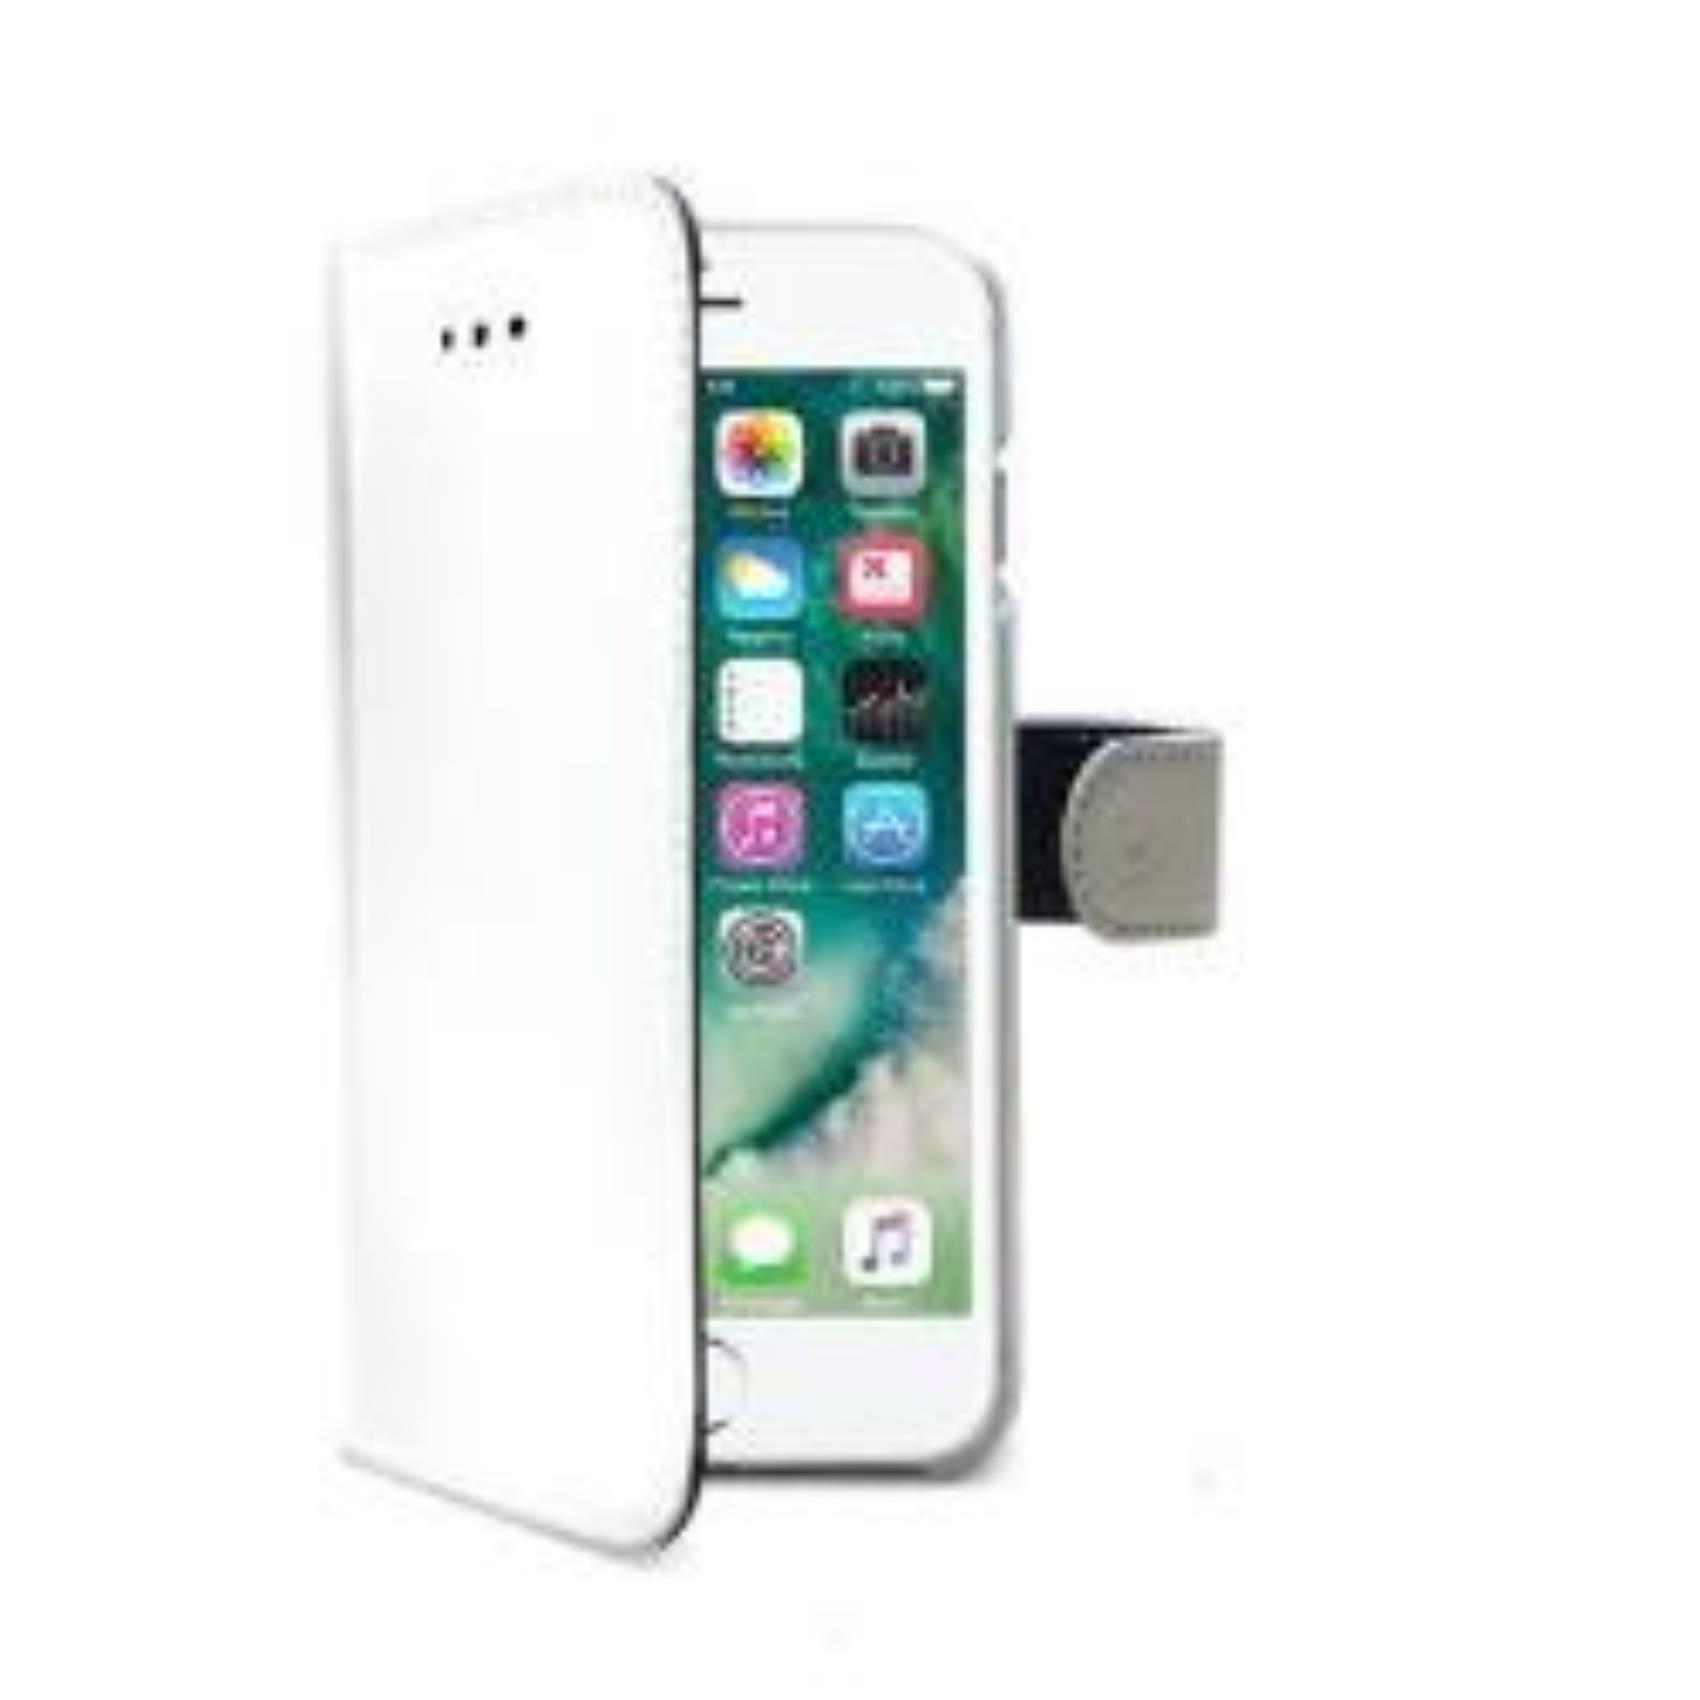 Wally Case Iphone 8 7 Plus White Celly Wally801wh 8021735721451